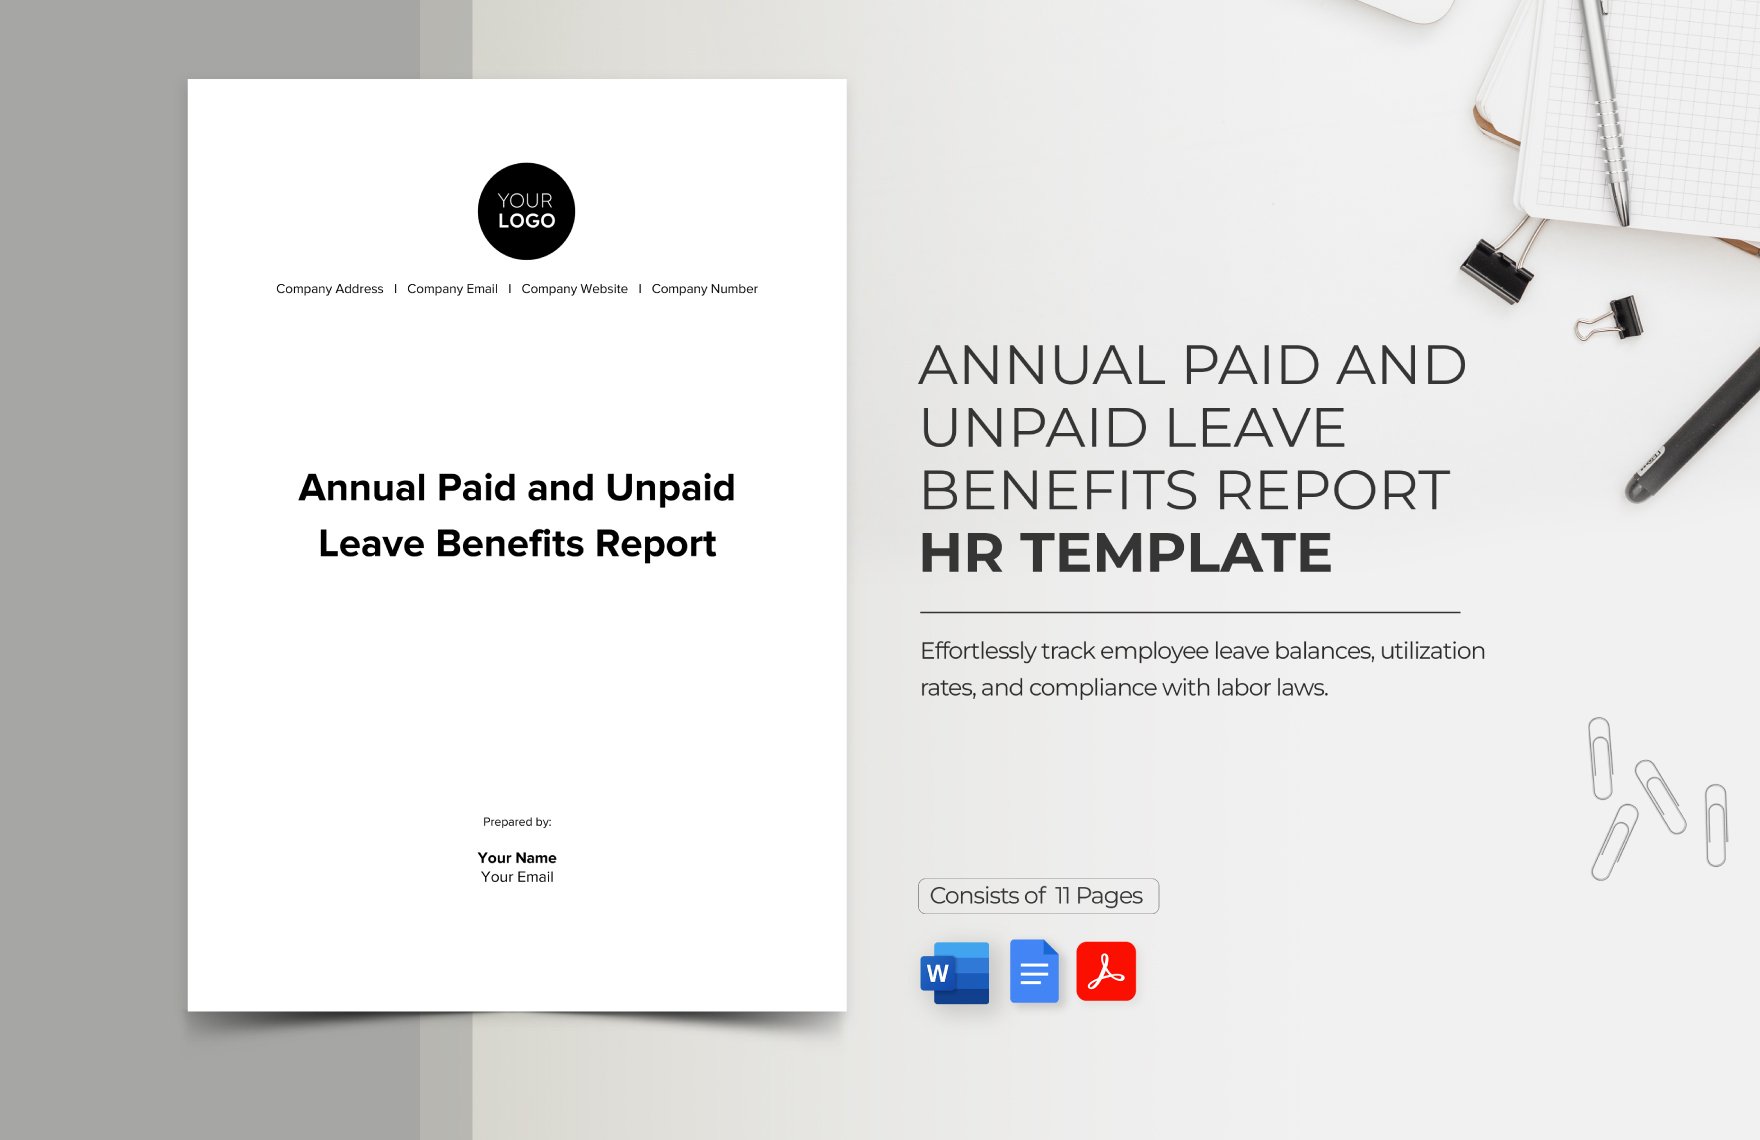 Annual Paid and Unpaid Leave Benefits Report HR Template